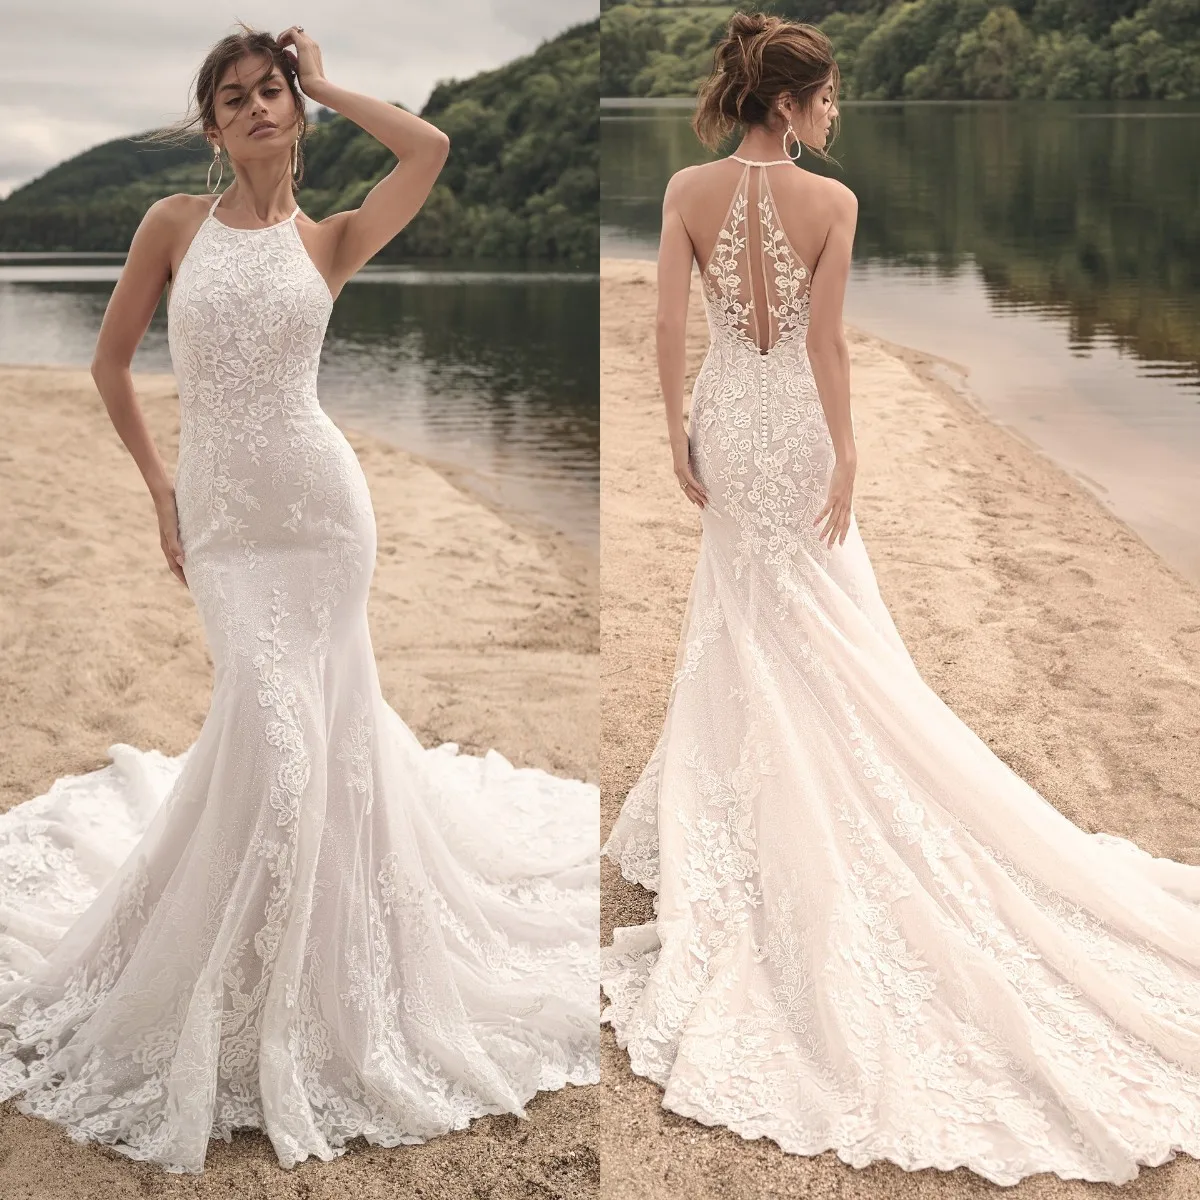 

Elegant Beach Mermaid Wedding Dresses Lace Appliqued Beads Bridal Gowns Sexy See Thru Back Glitter Sequins Robes de Mariee